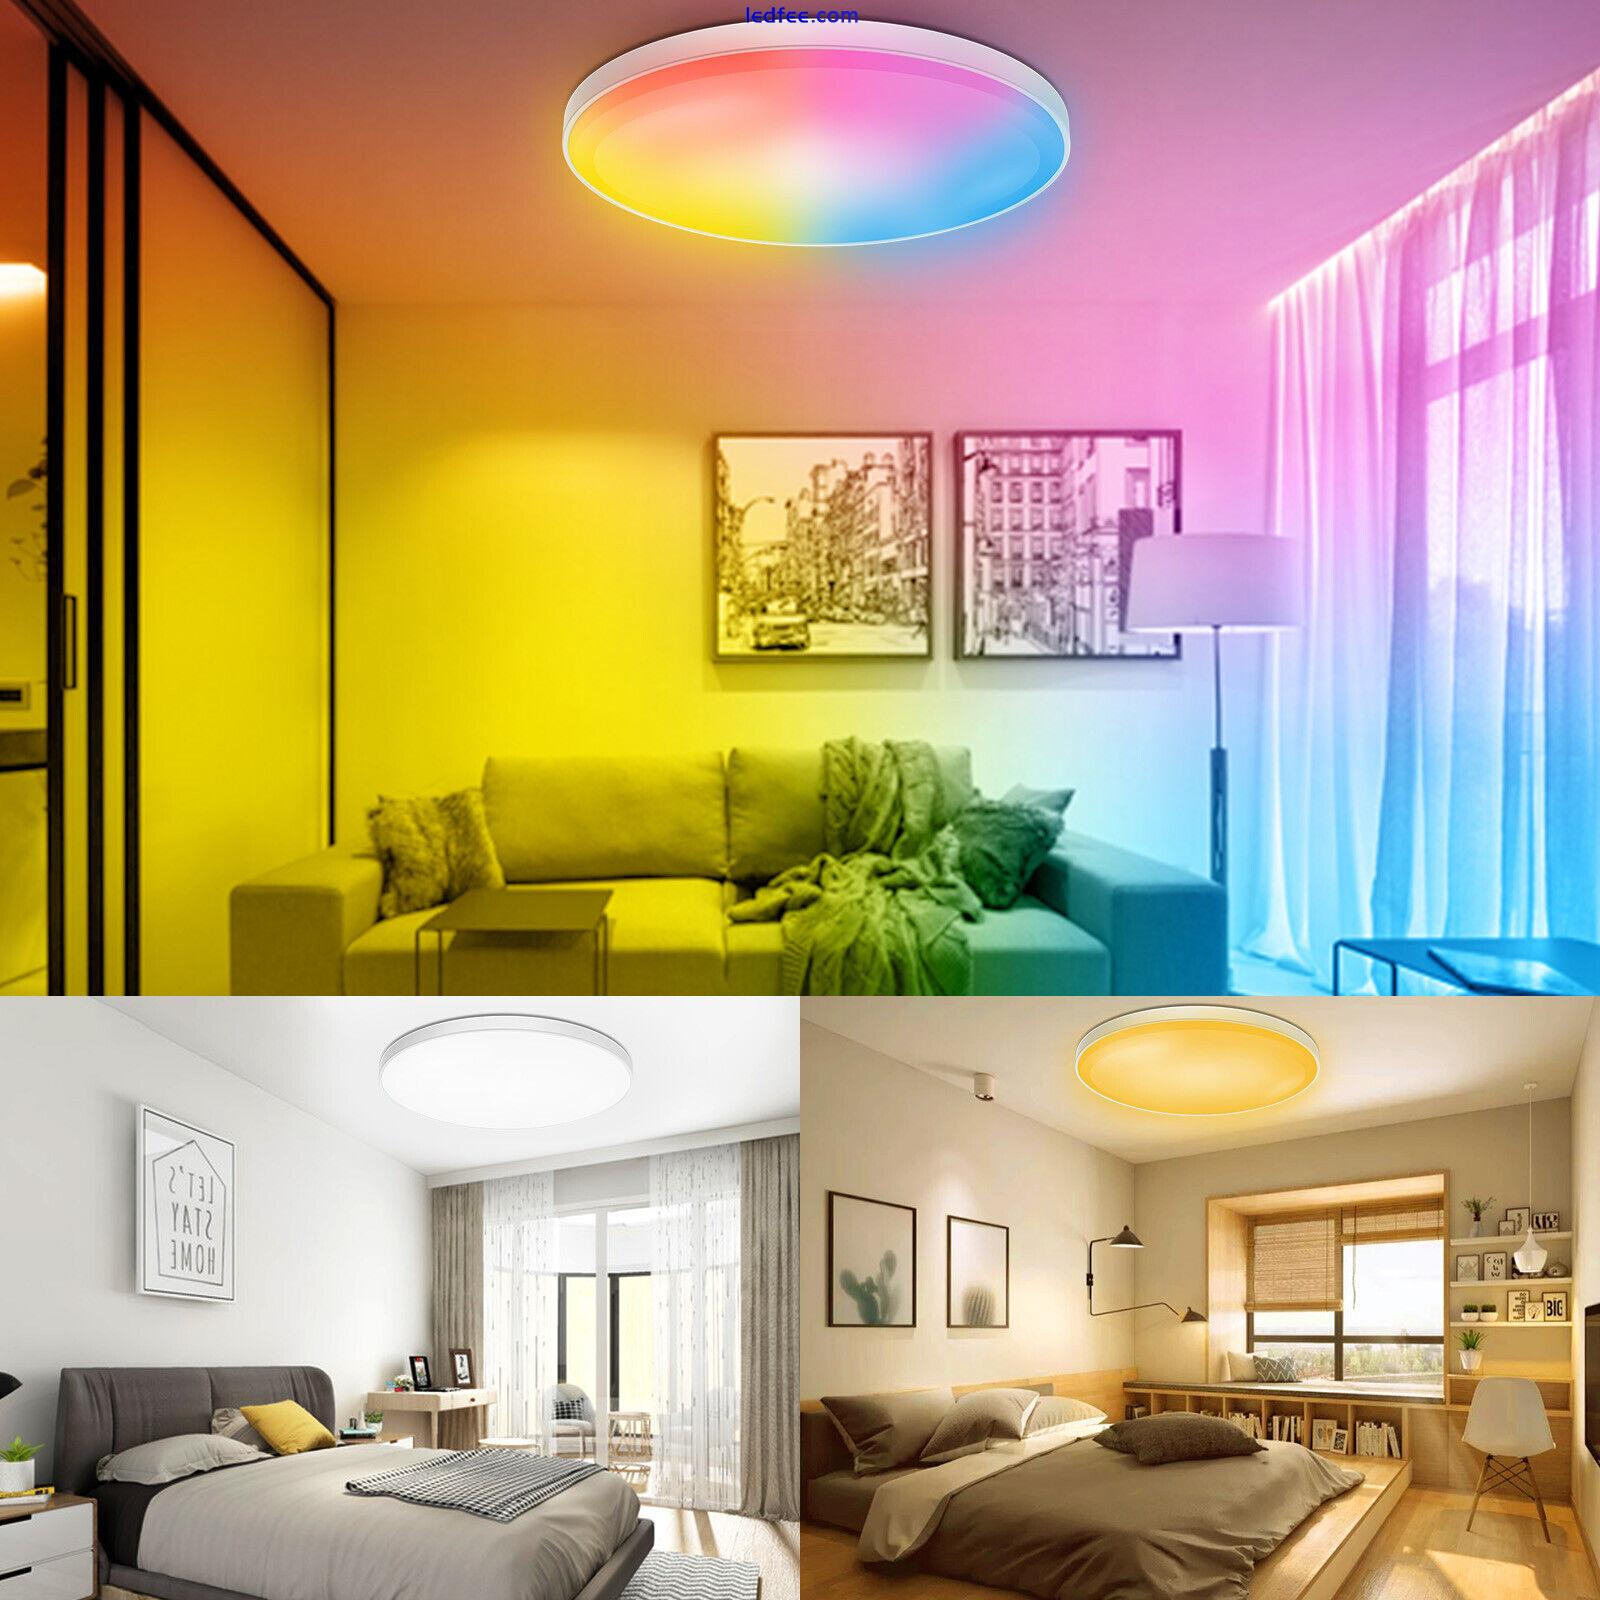 30W Smart LED Ceiling Light Lamp RGB Dimmable Bluetooth WIFI Fixture for Bedroom 4 